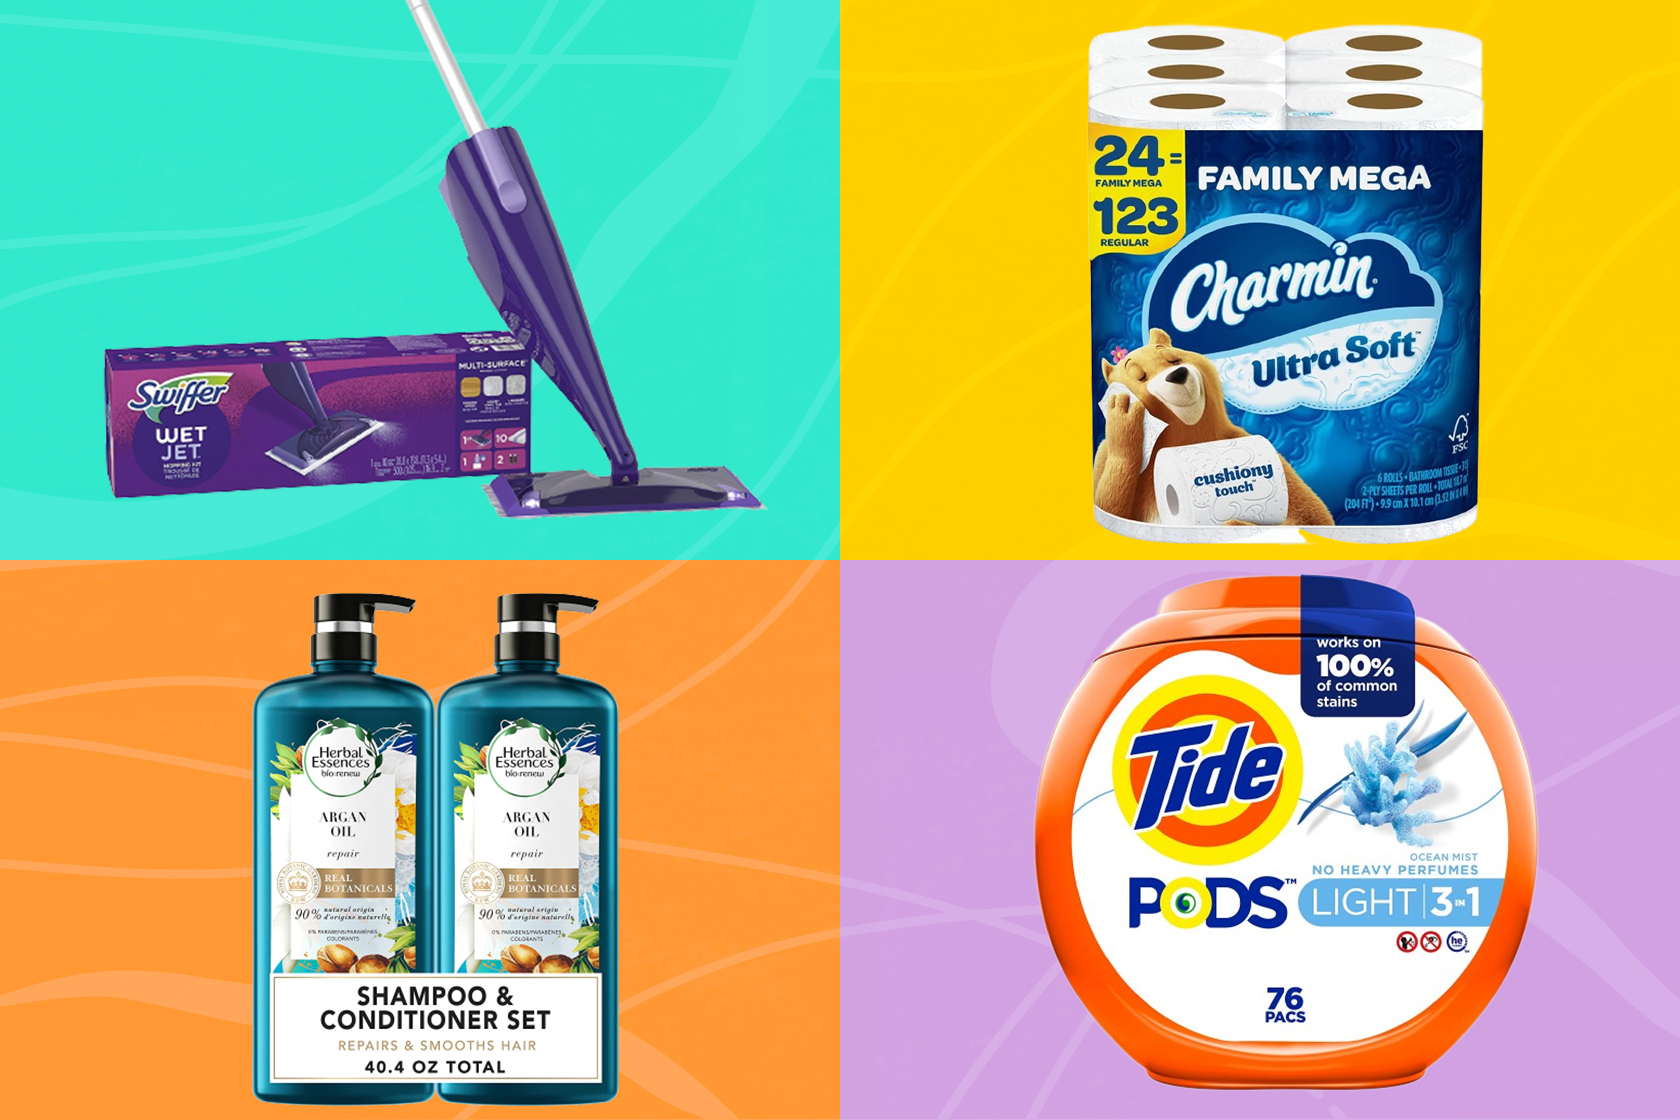 Spend $80 on Select P&G Household Items and Get a $20